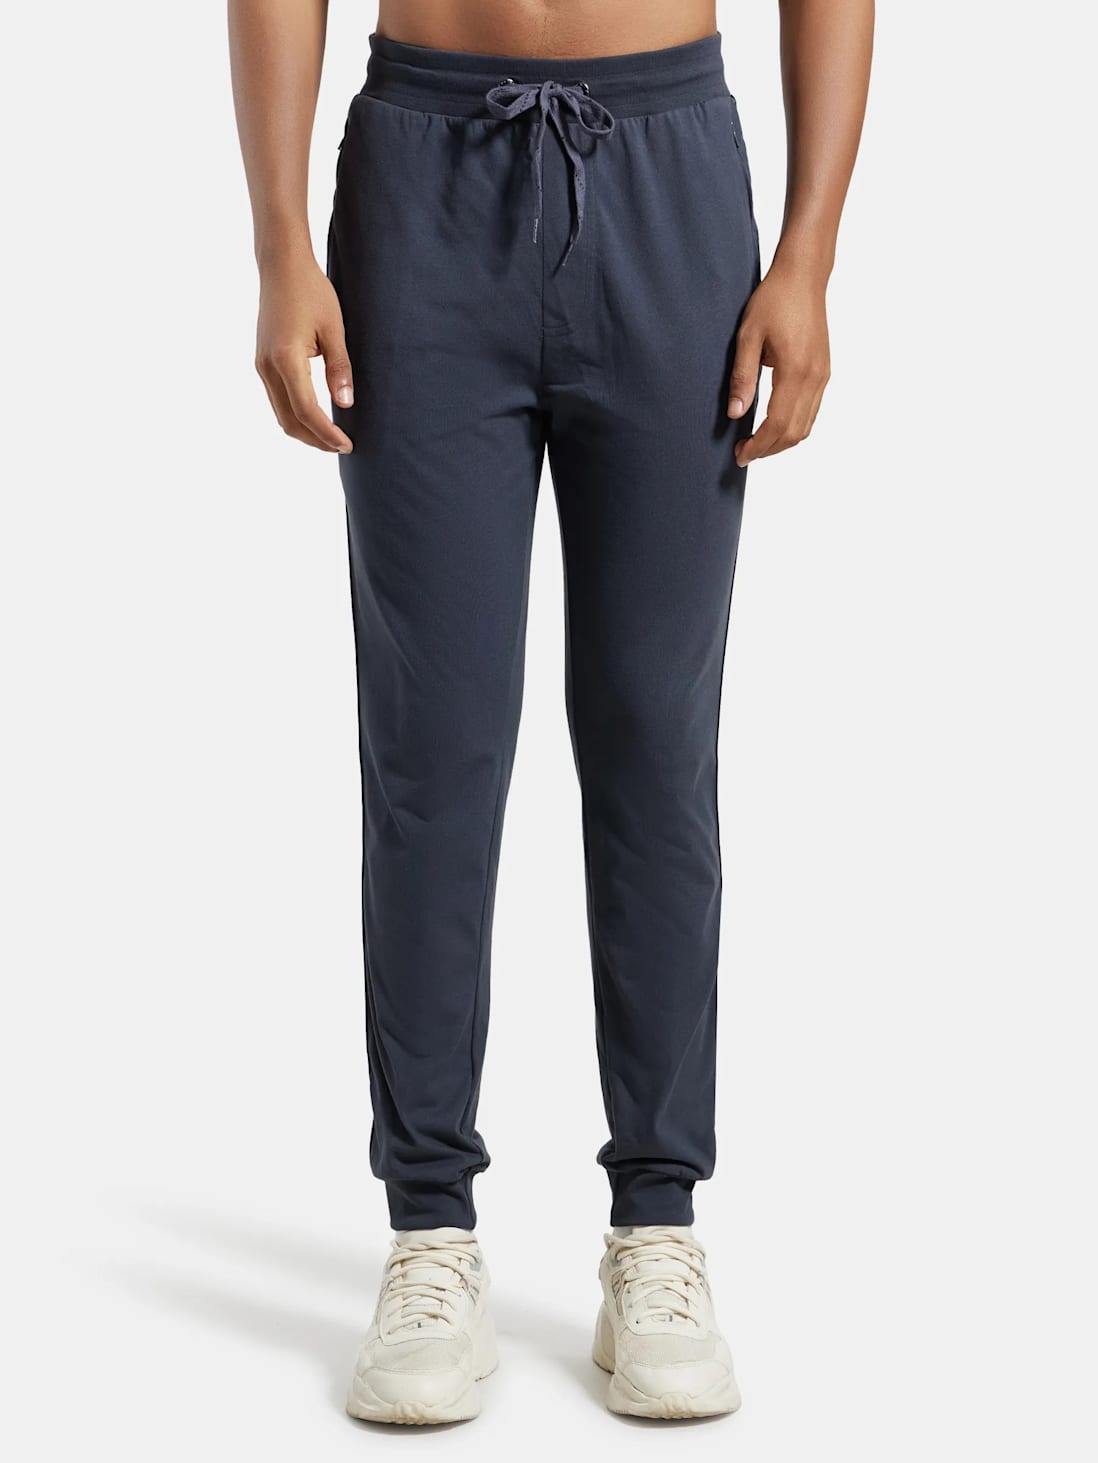 Jockey Men's Super Combed Cotton Slim Fit Joggers – Online Shopping site in  India